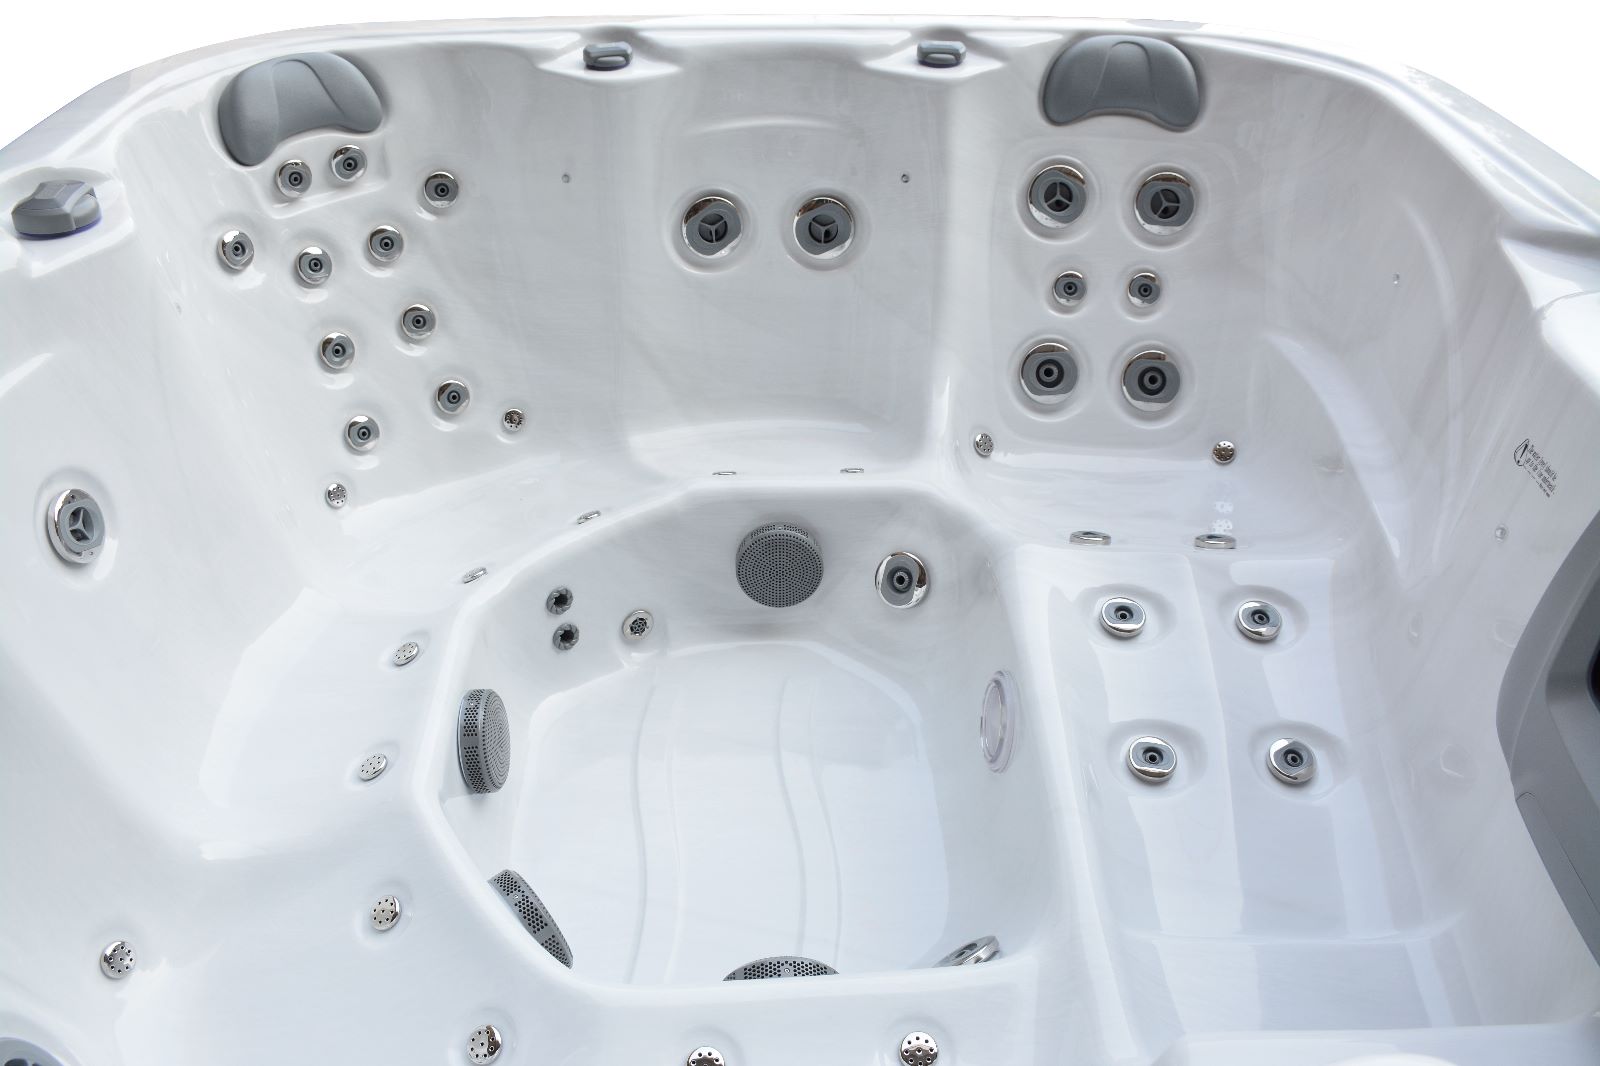 oasis rx-363 hot tub available at hot tub liverpool